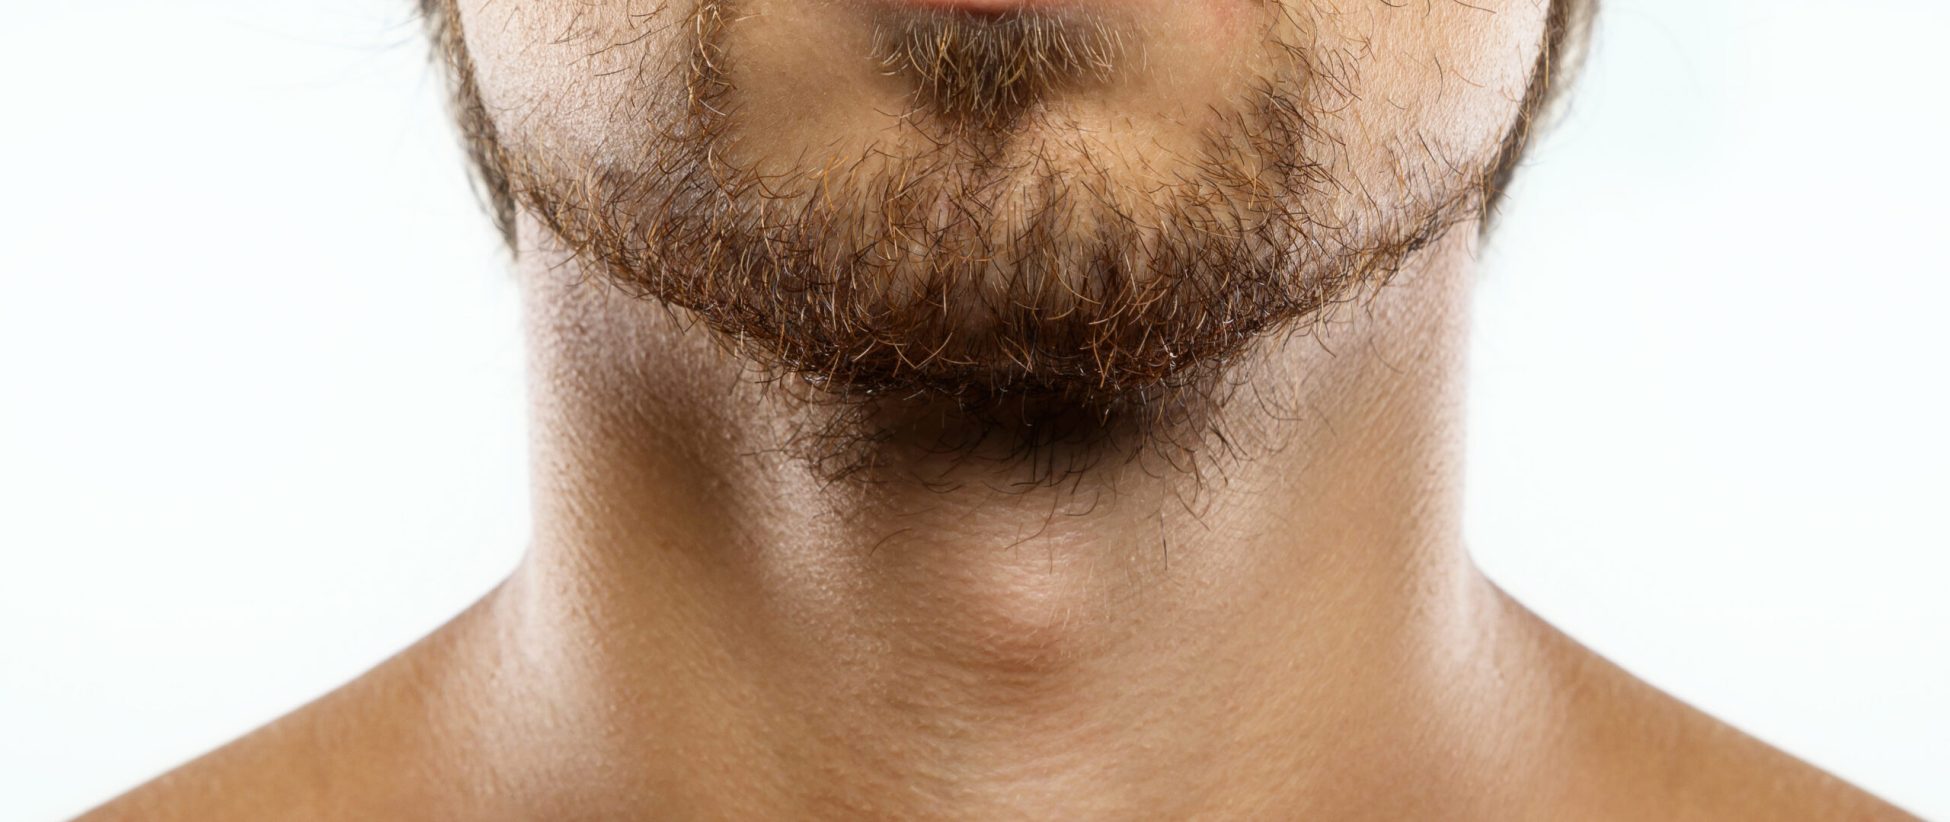 Closeup of unshaved men's face with a unkempt beard